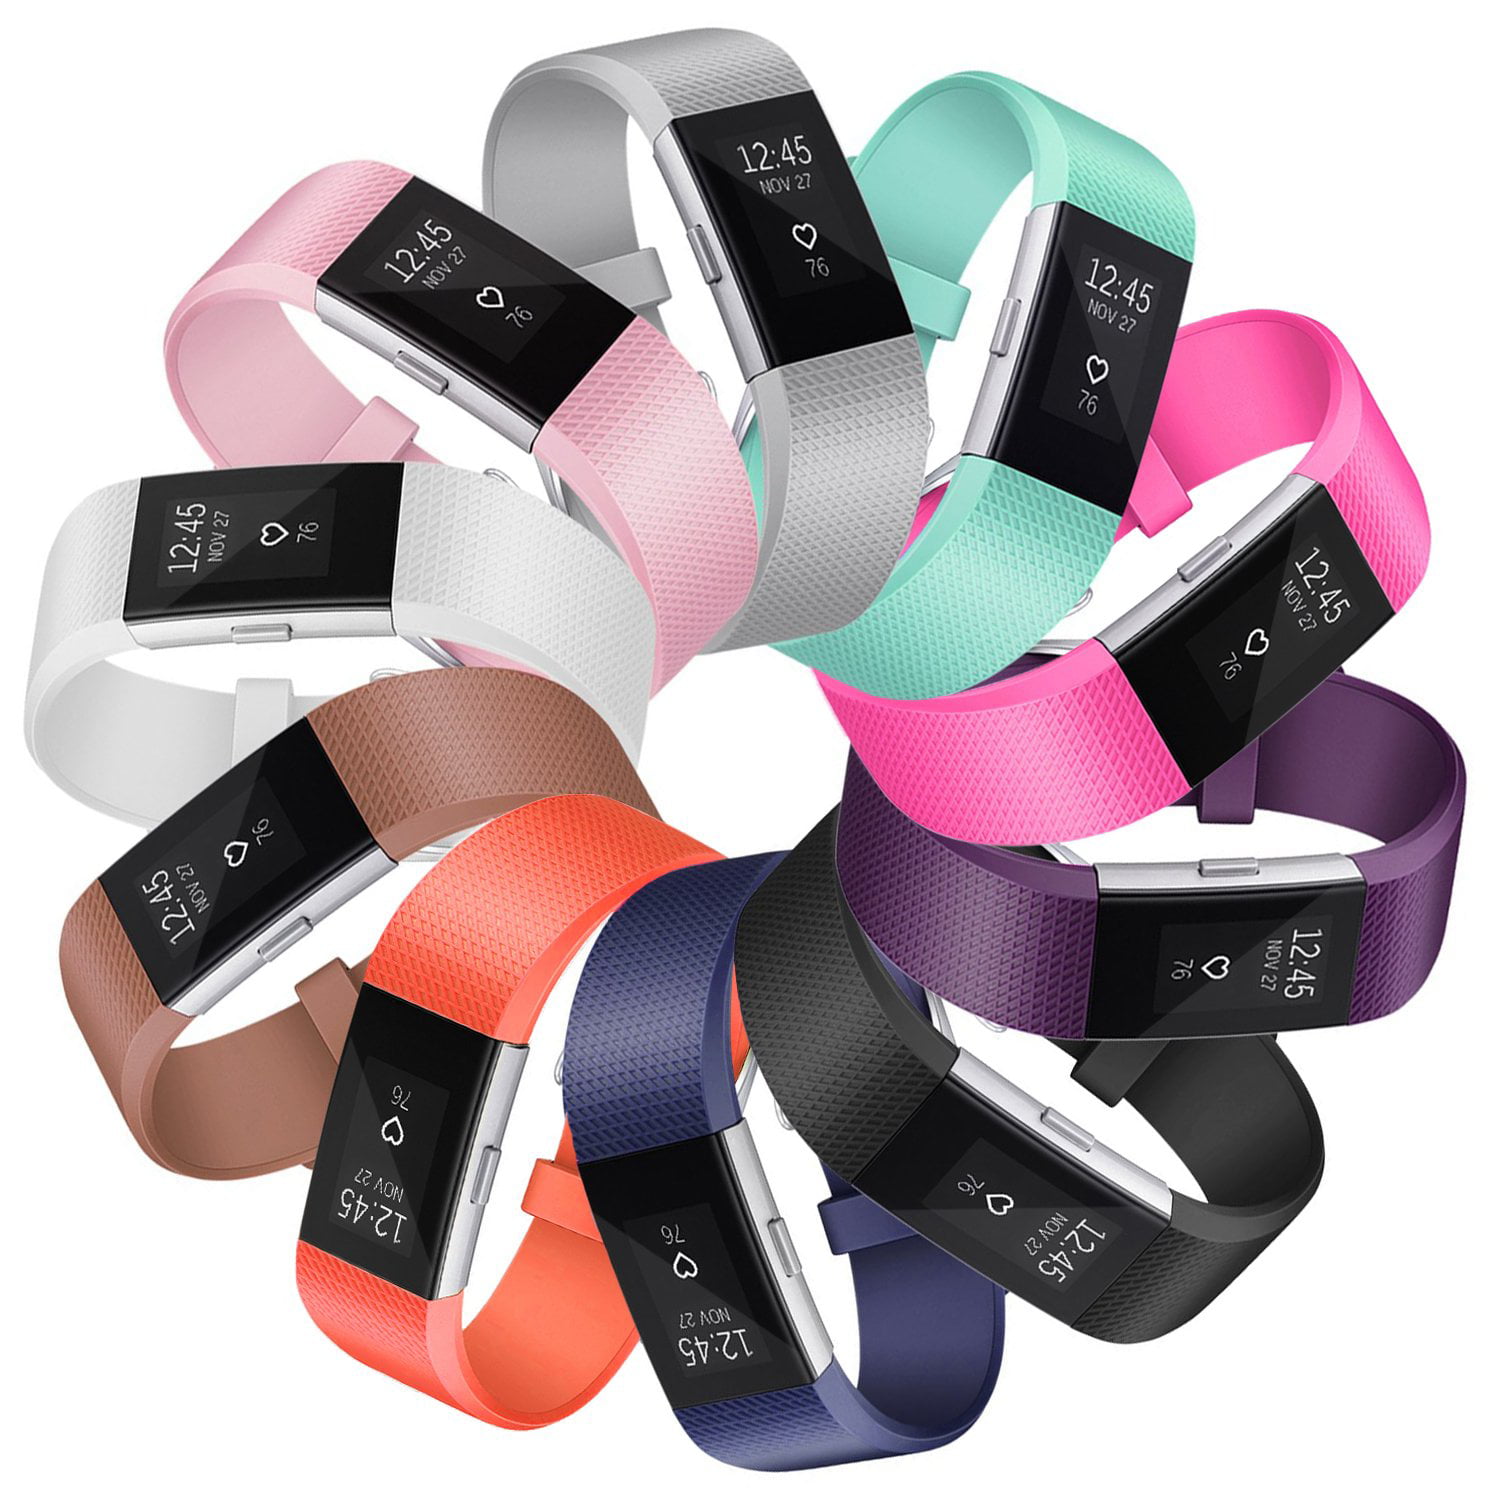 fitbit charge 2 mens bands